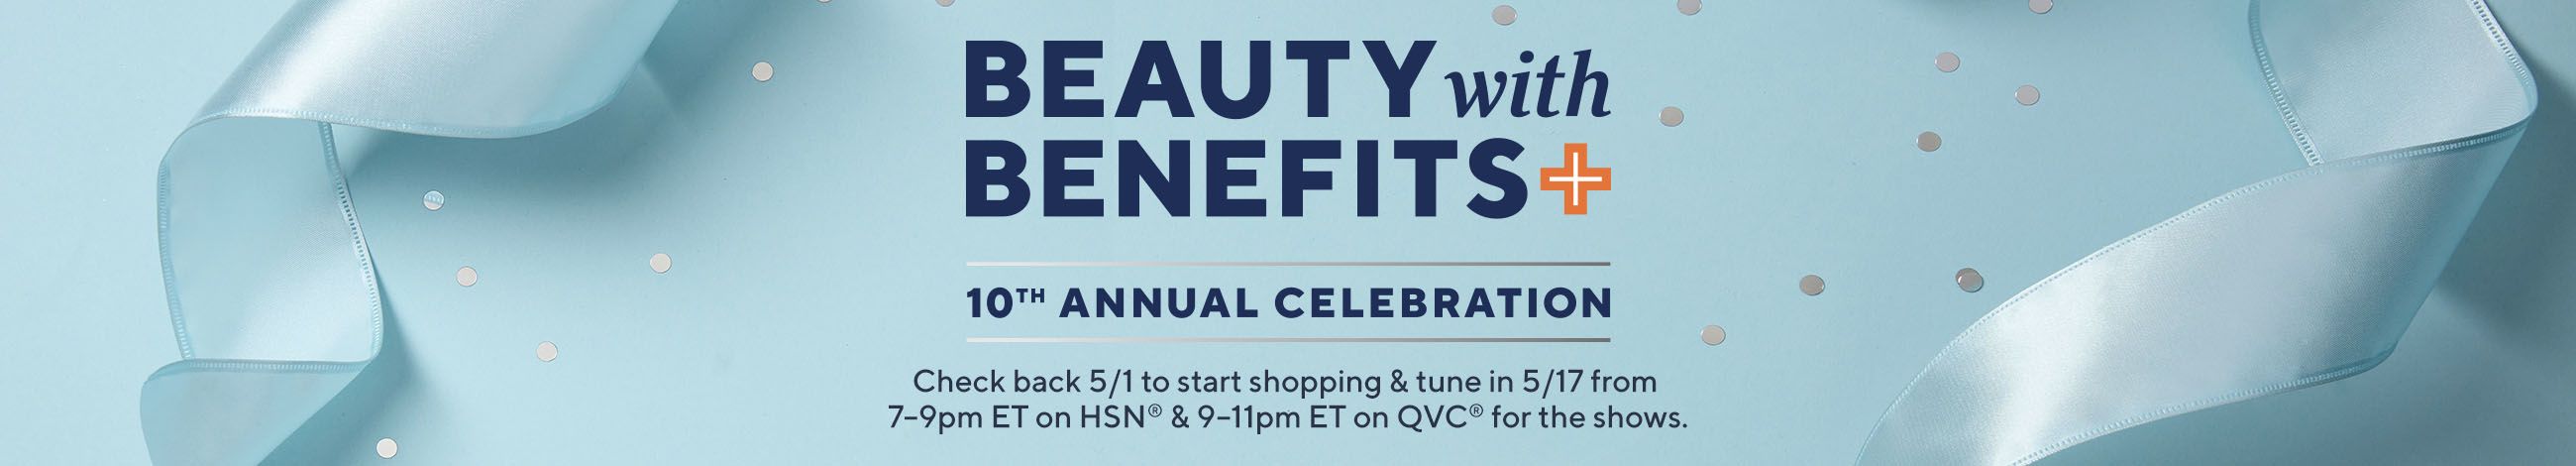 Beauty with Benefits 10th Annual Celebration  Check back 5/1 to start shopping & tune in 5/17 from 7–9pm ET on HSN® & 9–11pm ET on QVC® for the shows.